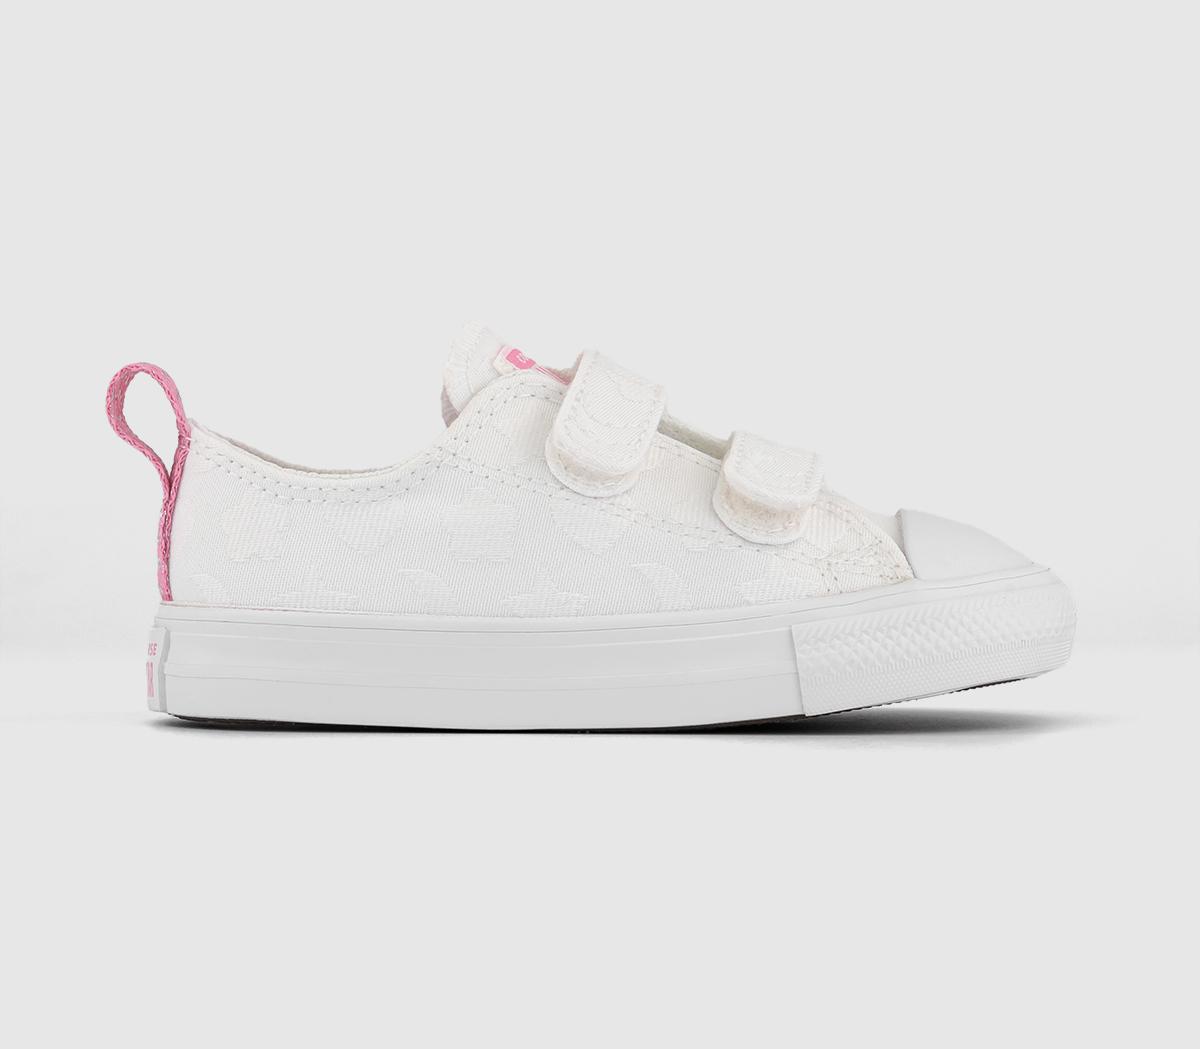 ConverseAll Star 2vlace TrainersWhite Oops Pink White